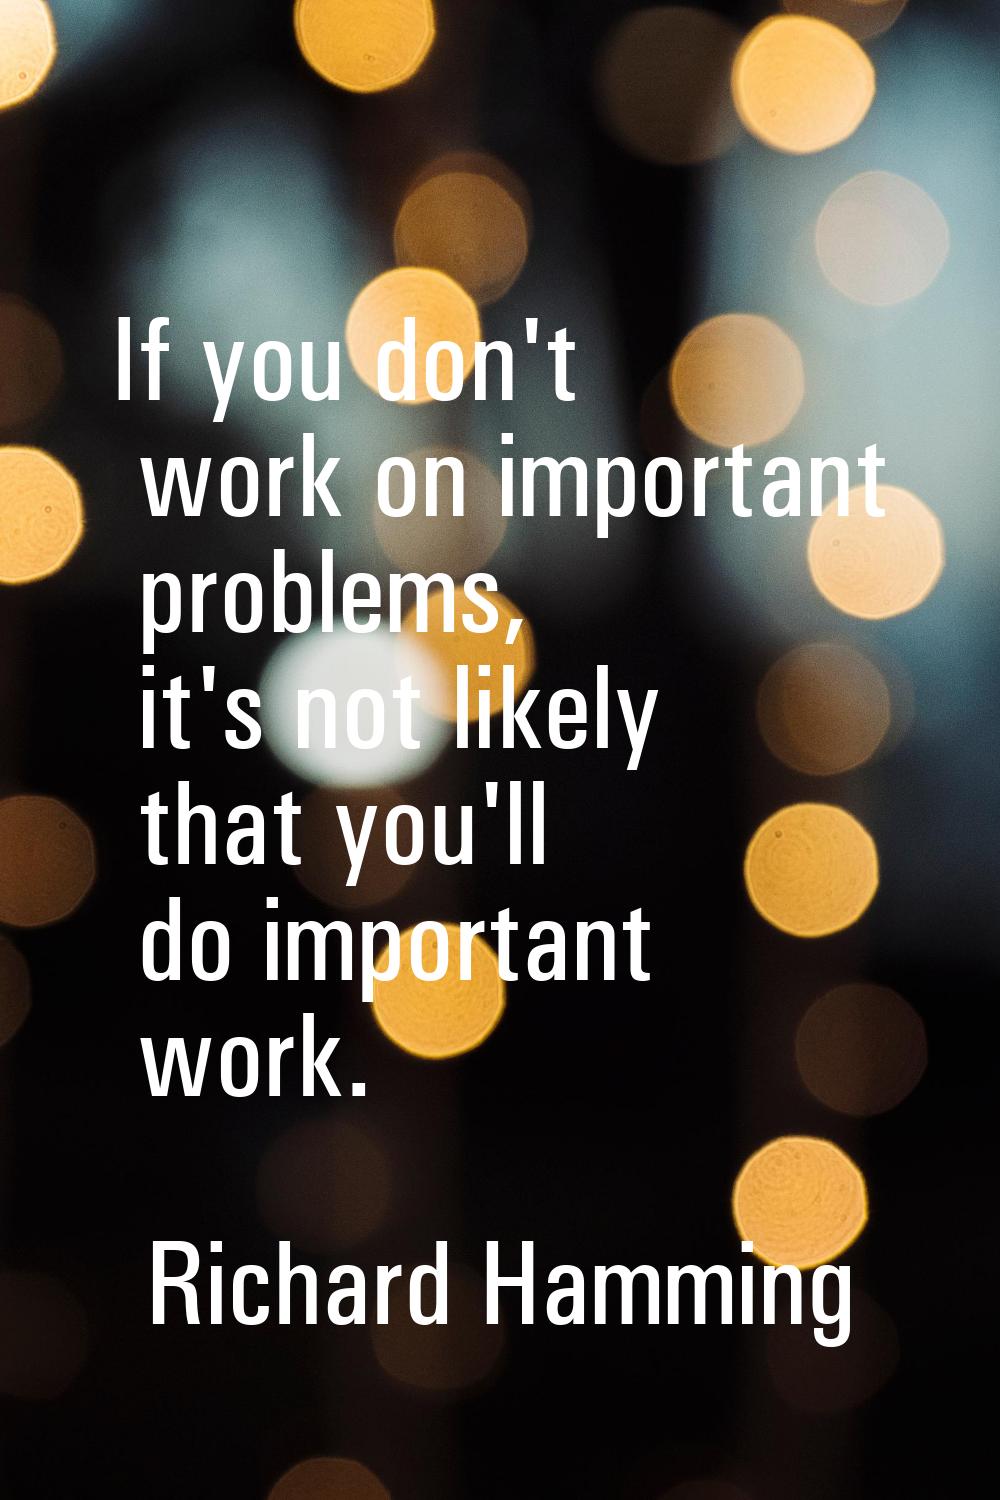 If you don't work on important problems, it's not likely that you'll do important work.